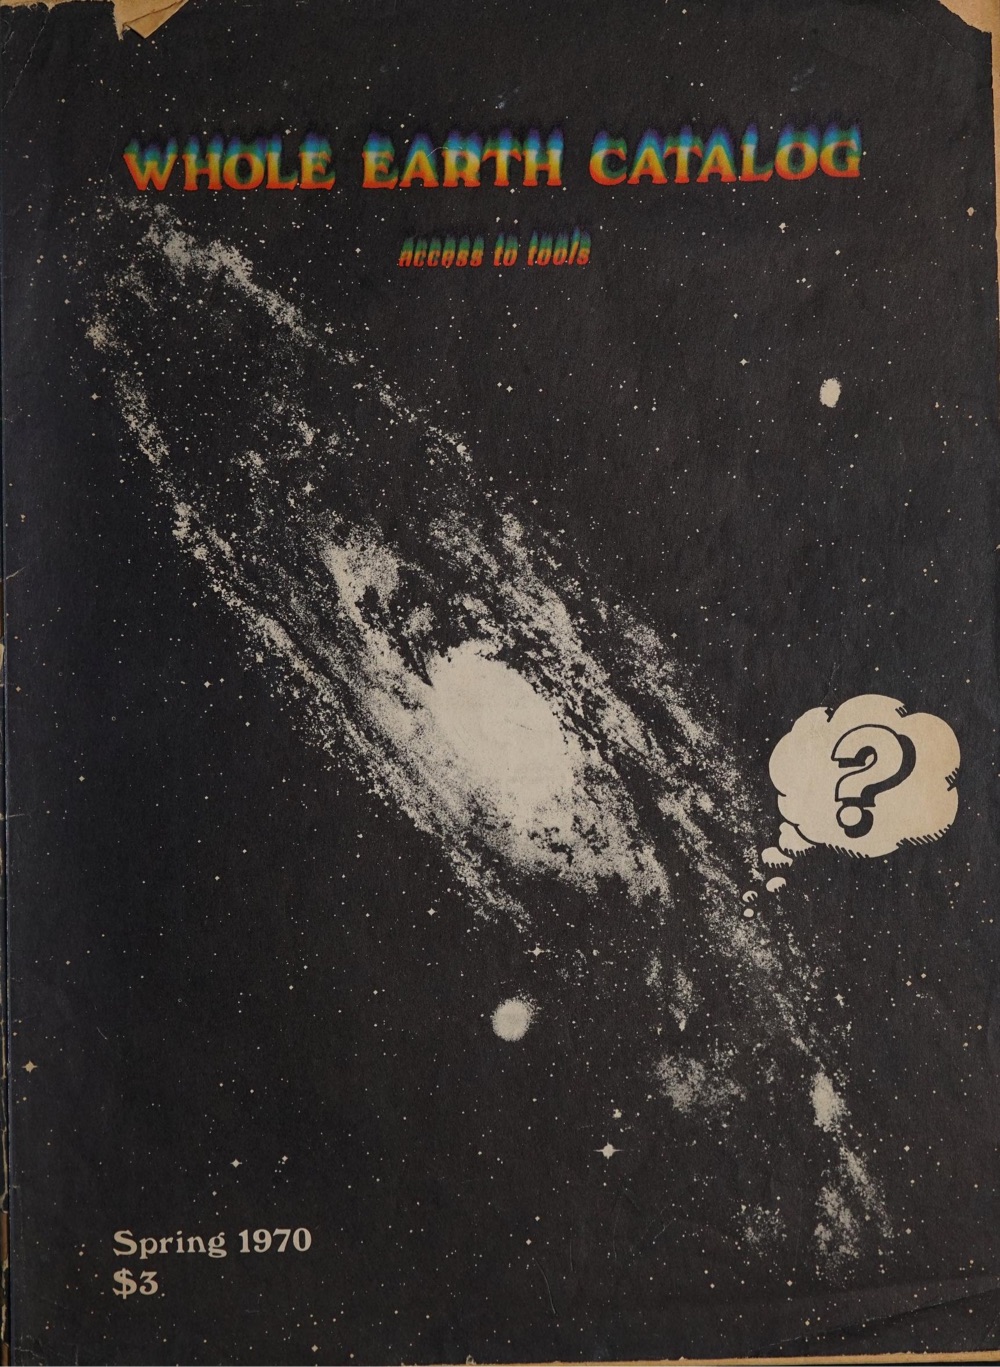 cover of the first issue of the Whole Earth Catalog